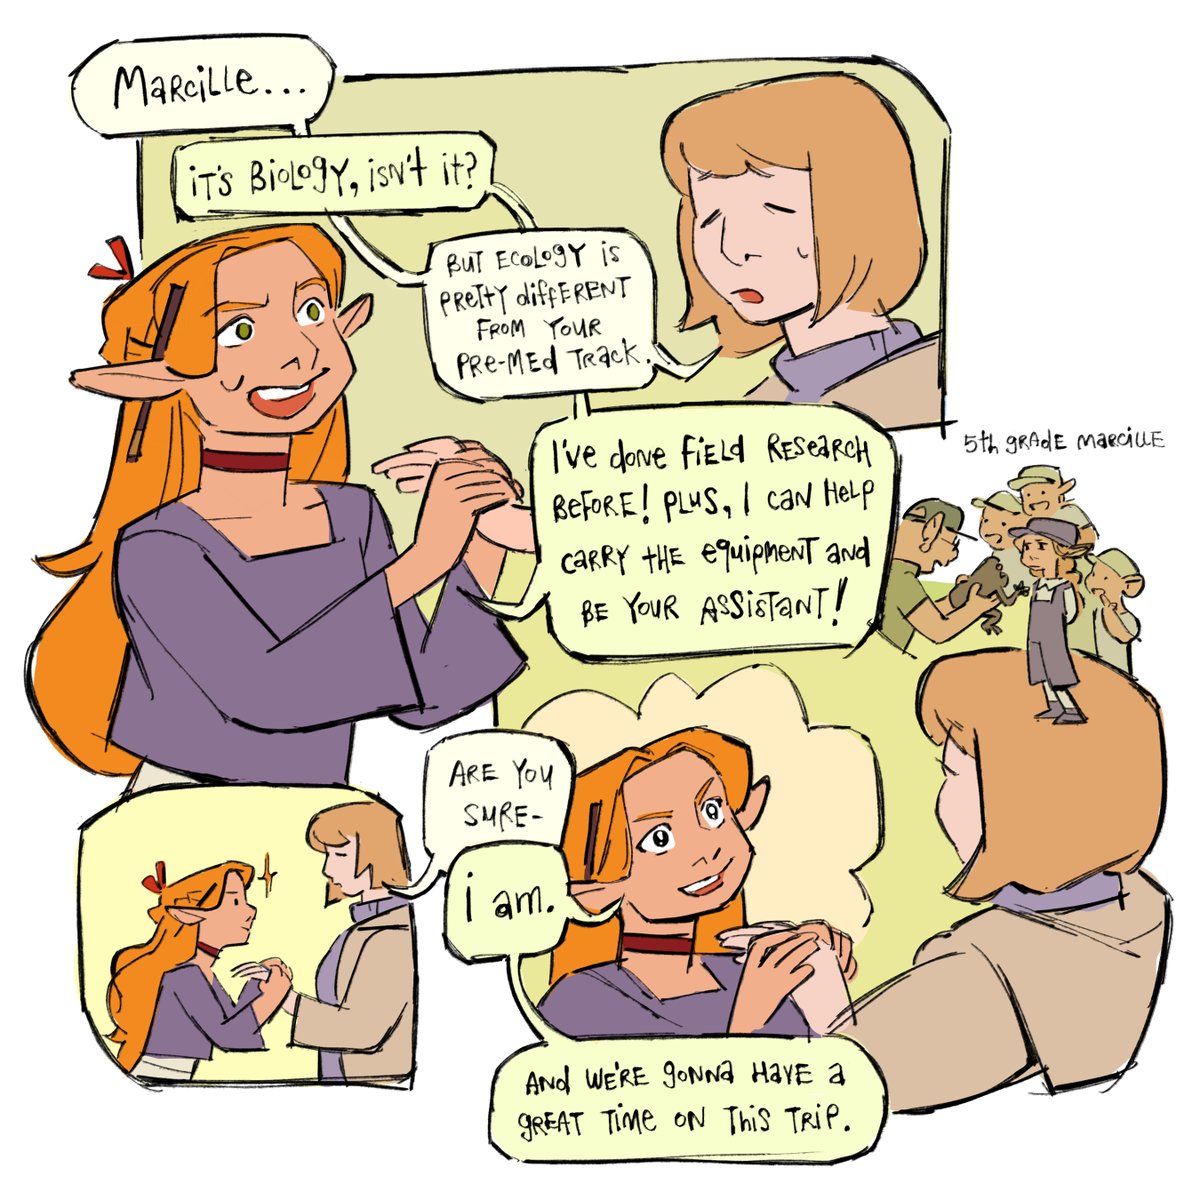 had a dumb #modernau thought and ran with it o/ (#comic part 1)
.
.
#dungeonmeshifanart #dungeonmeshi #deliciousindungeon #marcille #falin #farcille